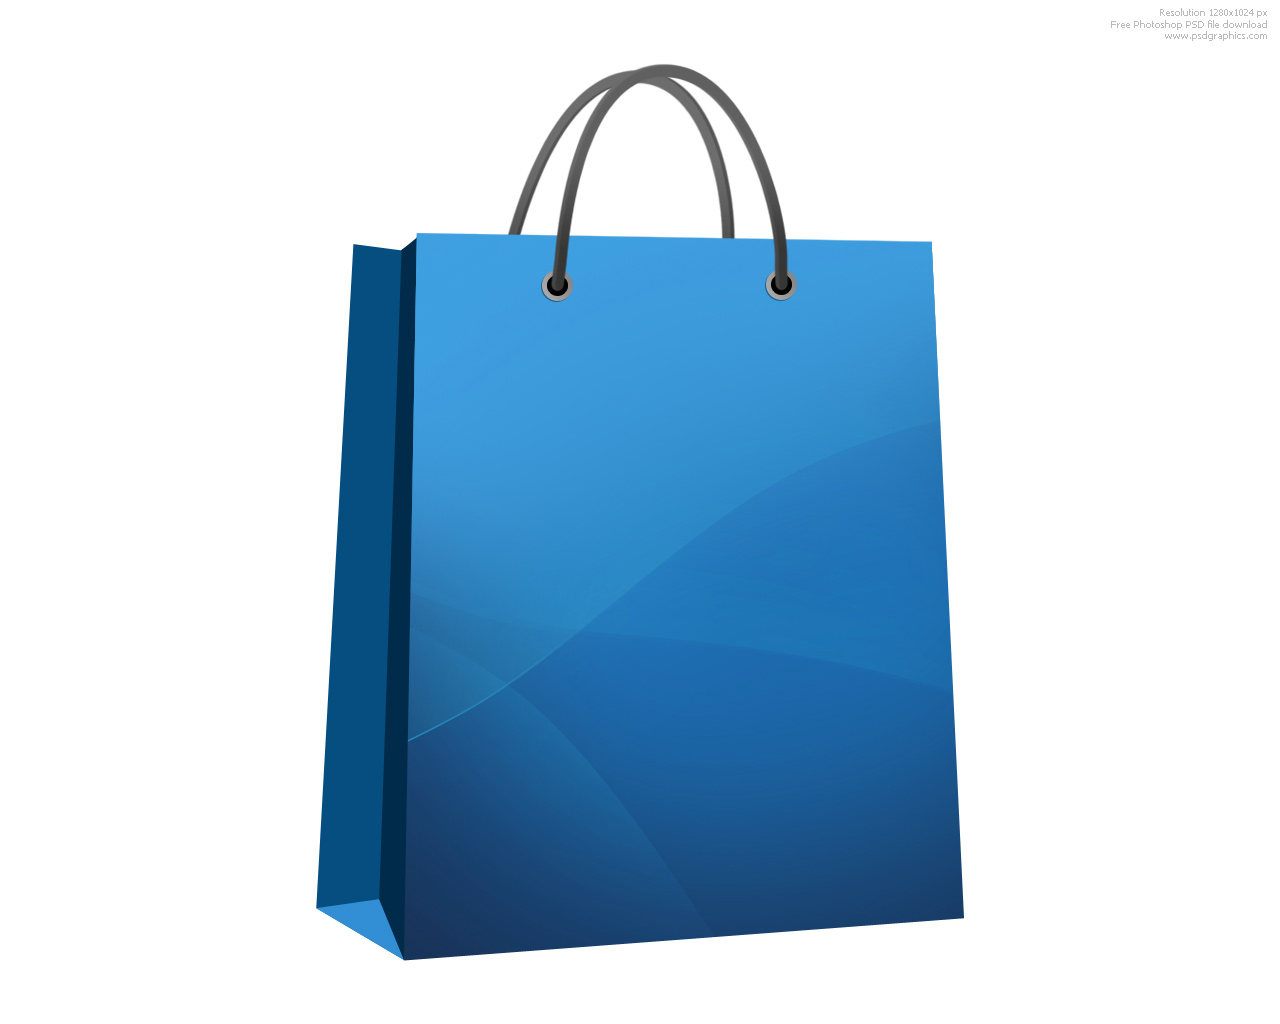 Free Pictures Of Shopping Bags, Download Free Clip Art, Free